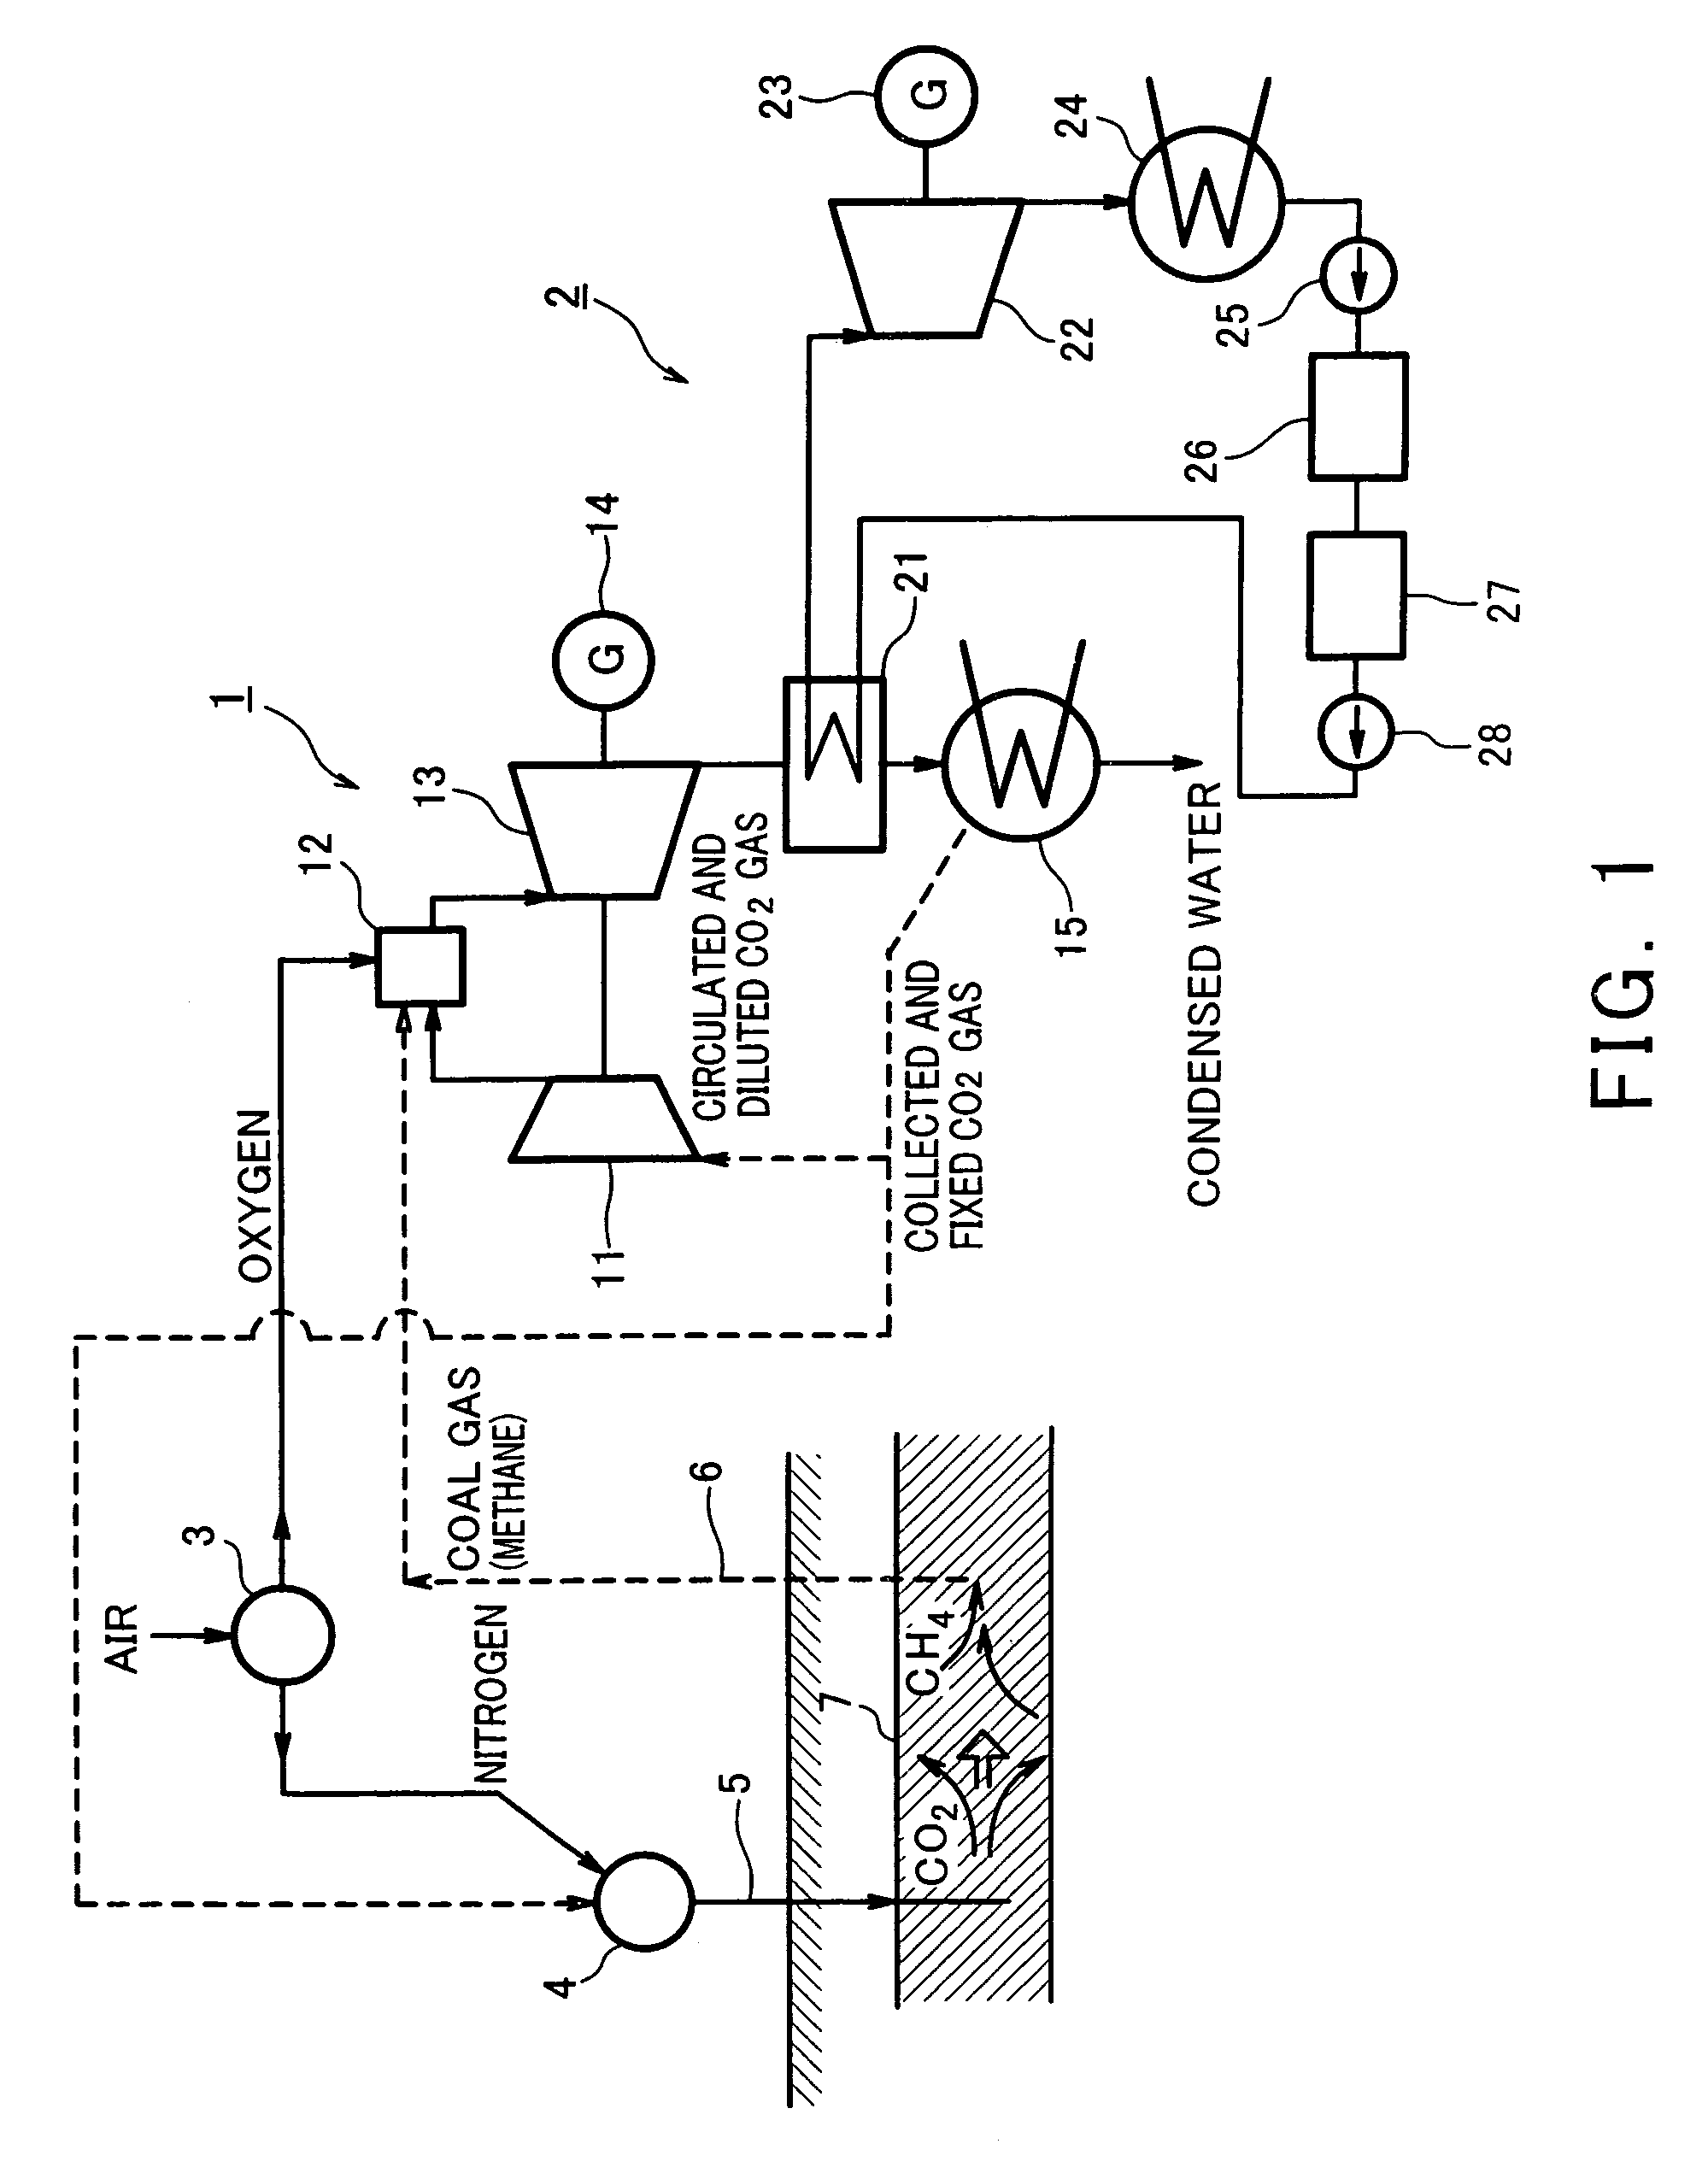 Gas turbine system comprising closed system of fuel and combustion gas using underground coal layer